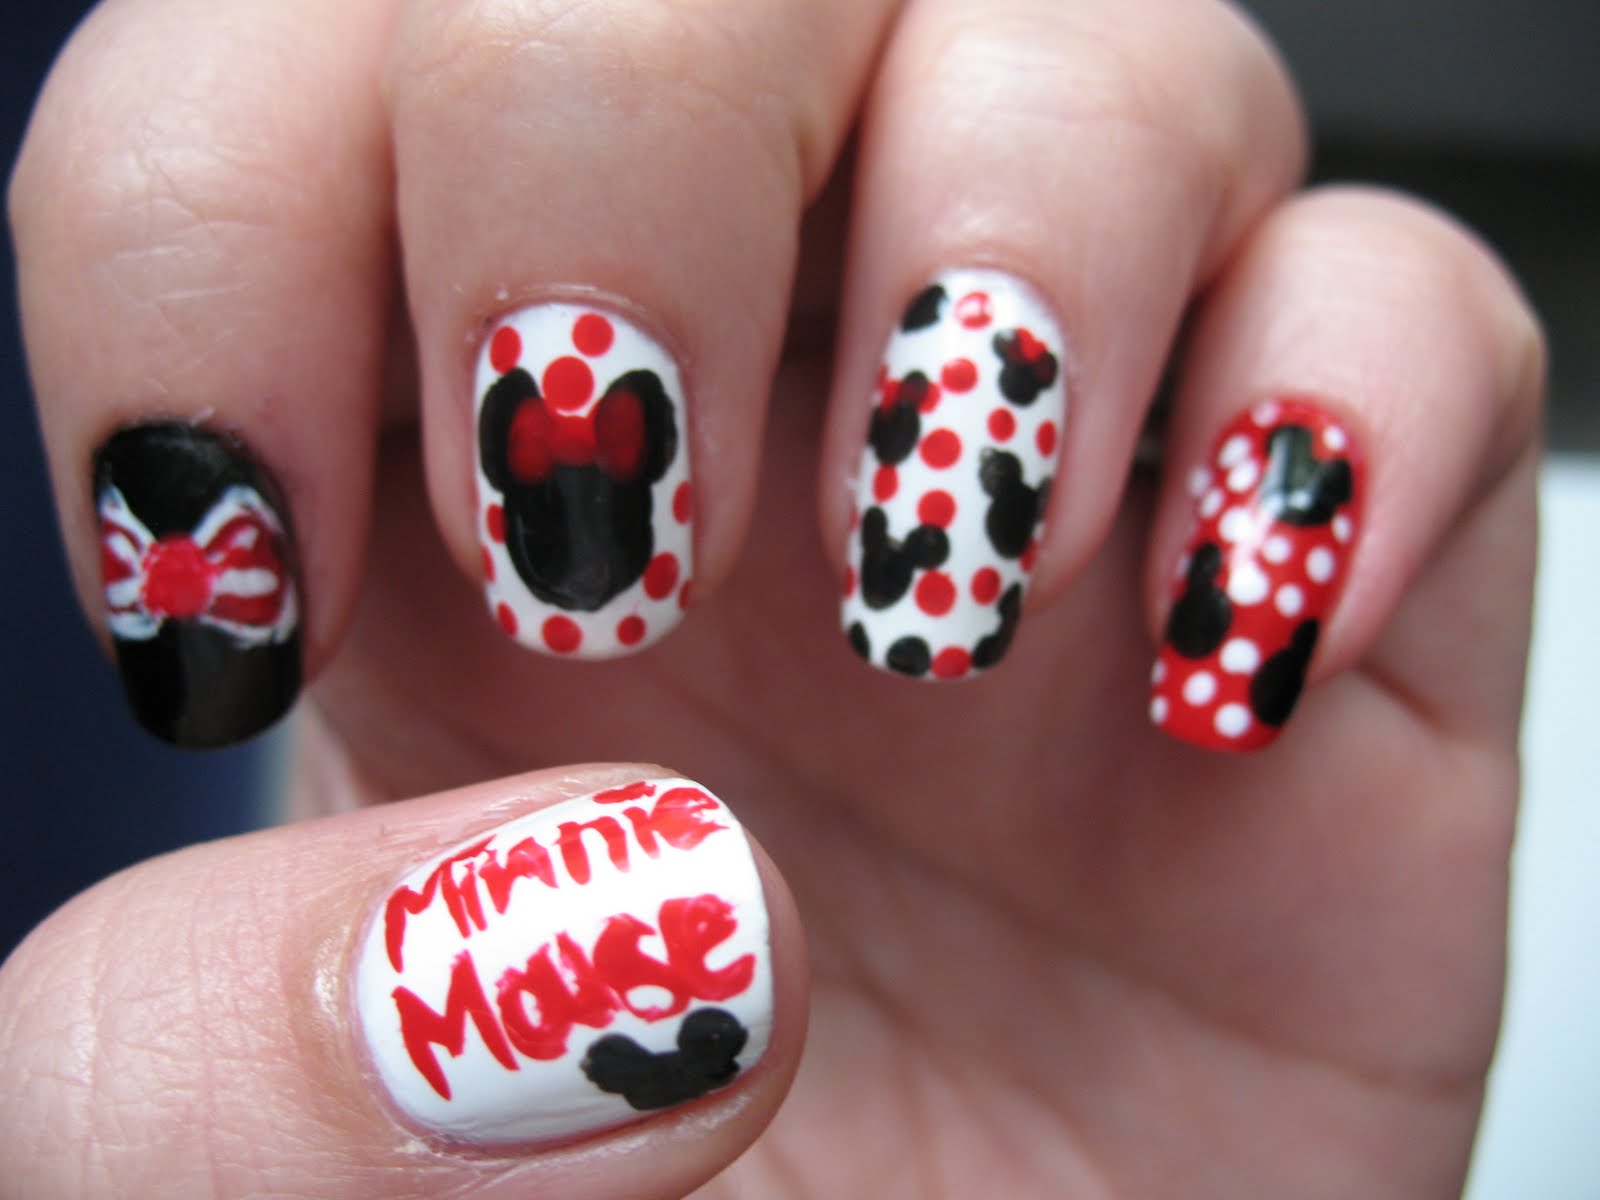  Nail Art Contest . I decided to go with a cute little Minnie Mouse